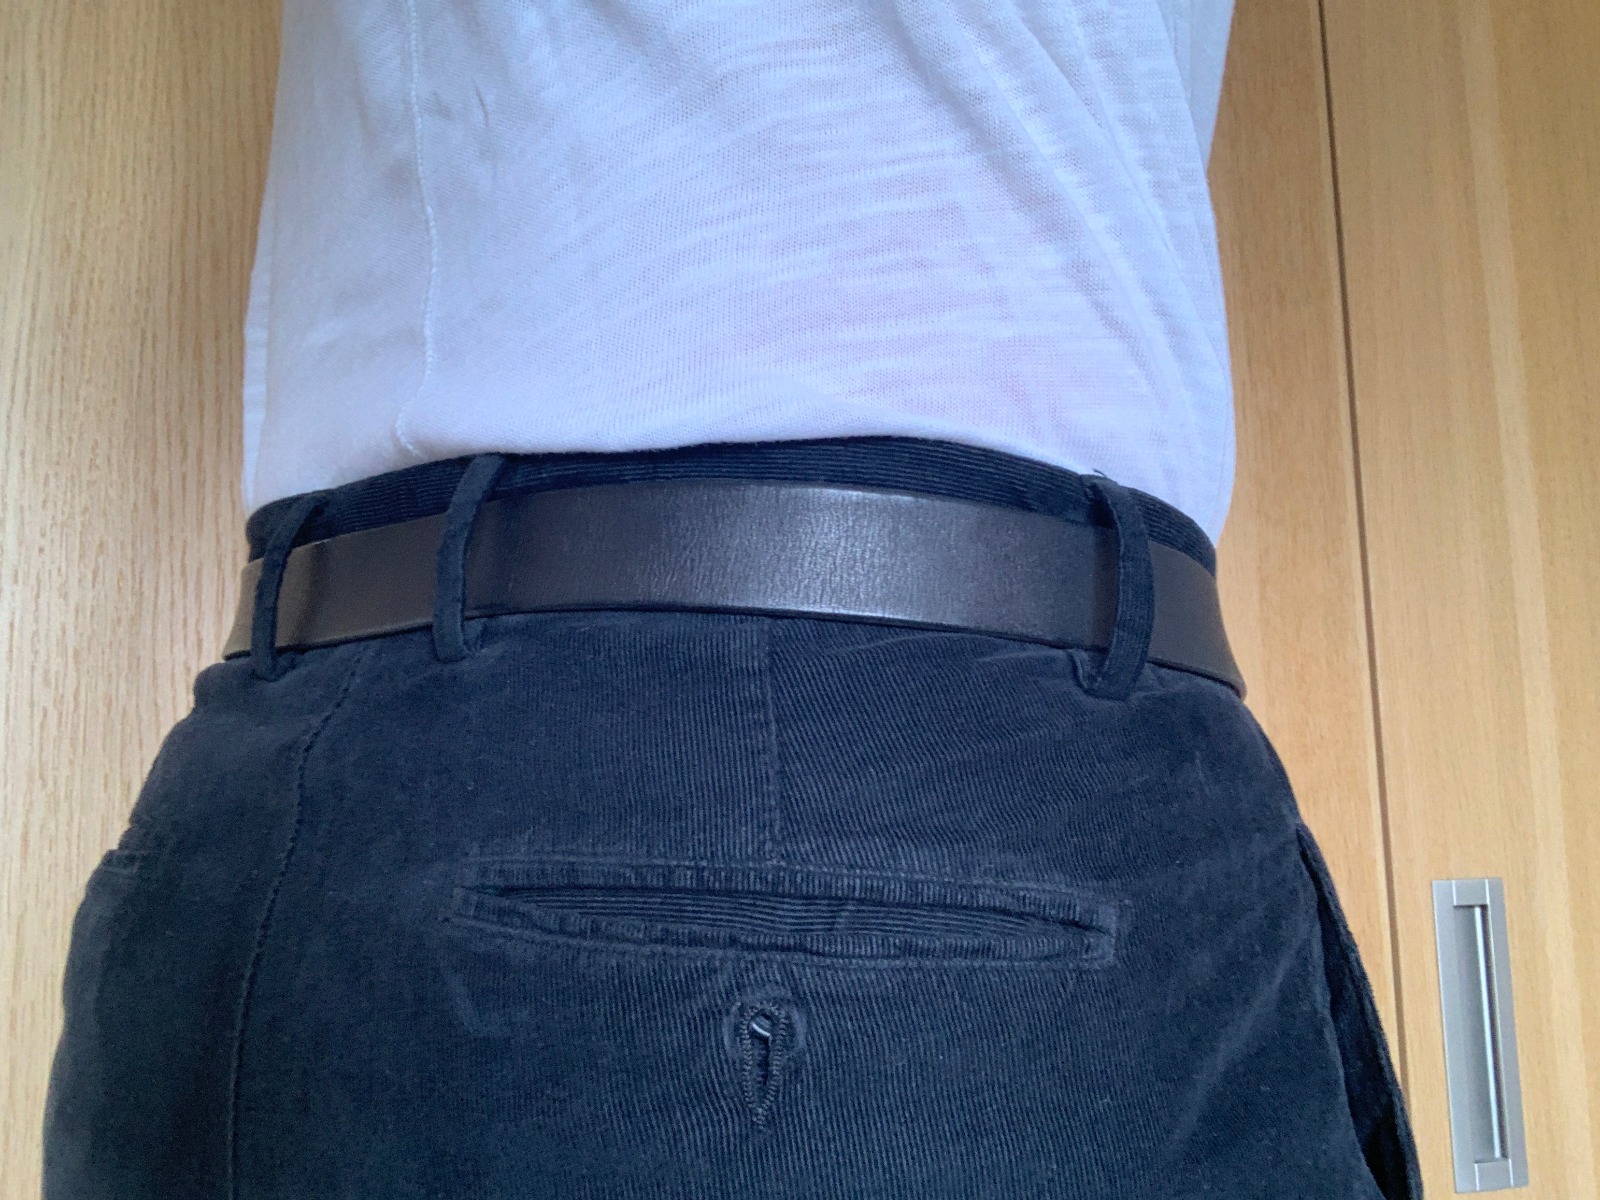 Cord Trousers from behind with belt